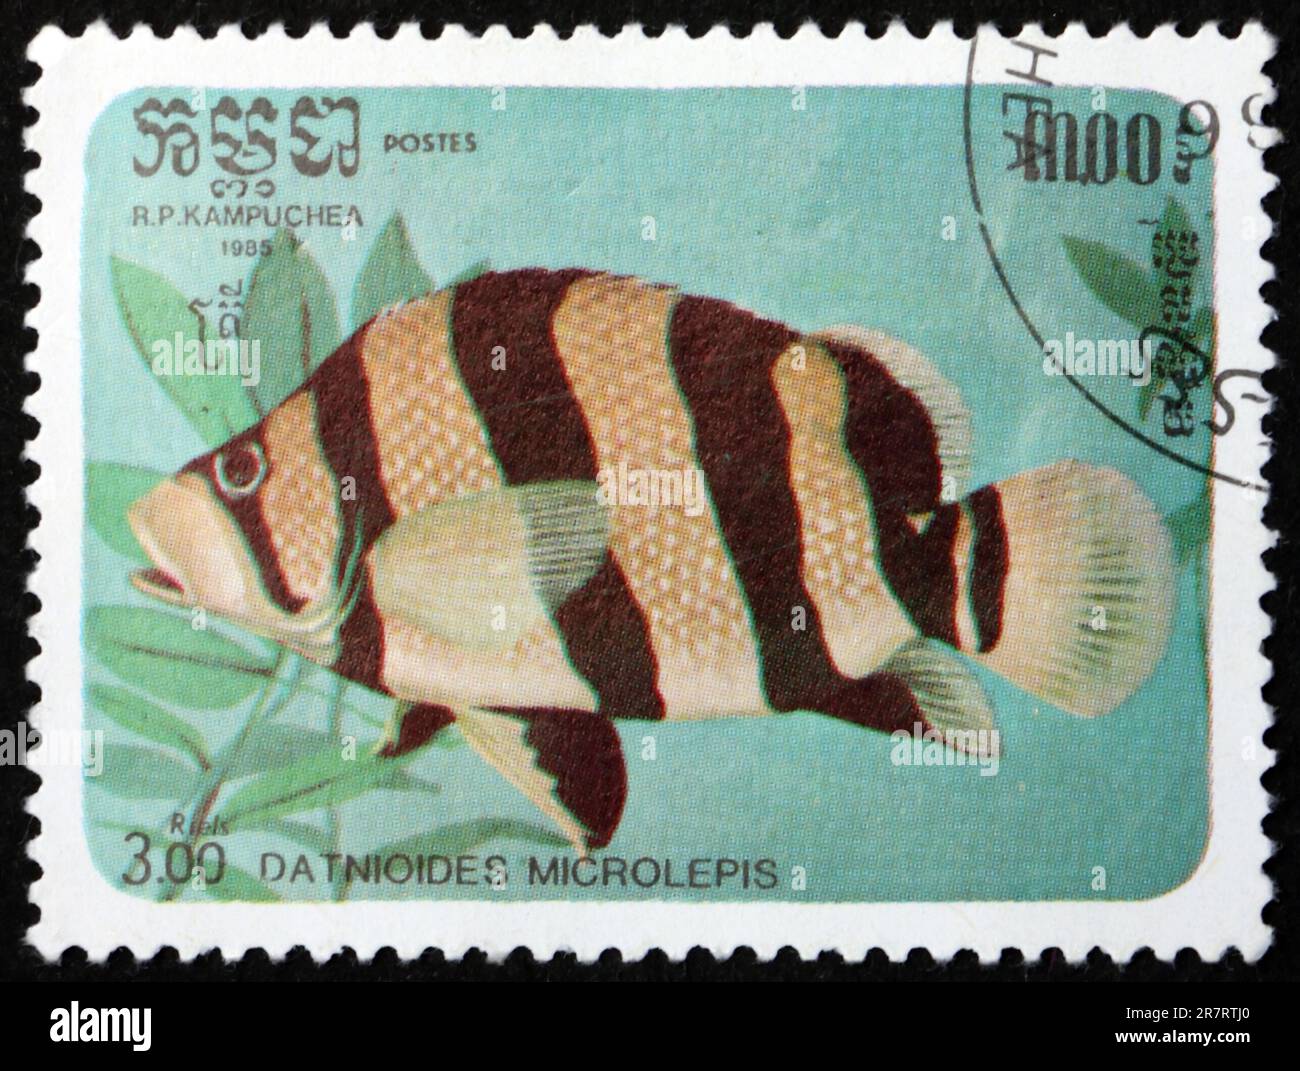 CAMBODIA - CIRCA 1985: a stamp printed in Cambodia shows Indonesian tigerfish, datnioides microlepis, is a species of freshwater fish endemic to the M Stock Photo